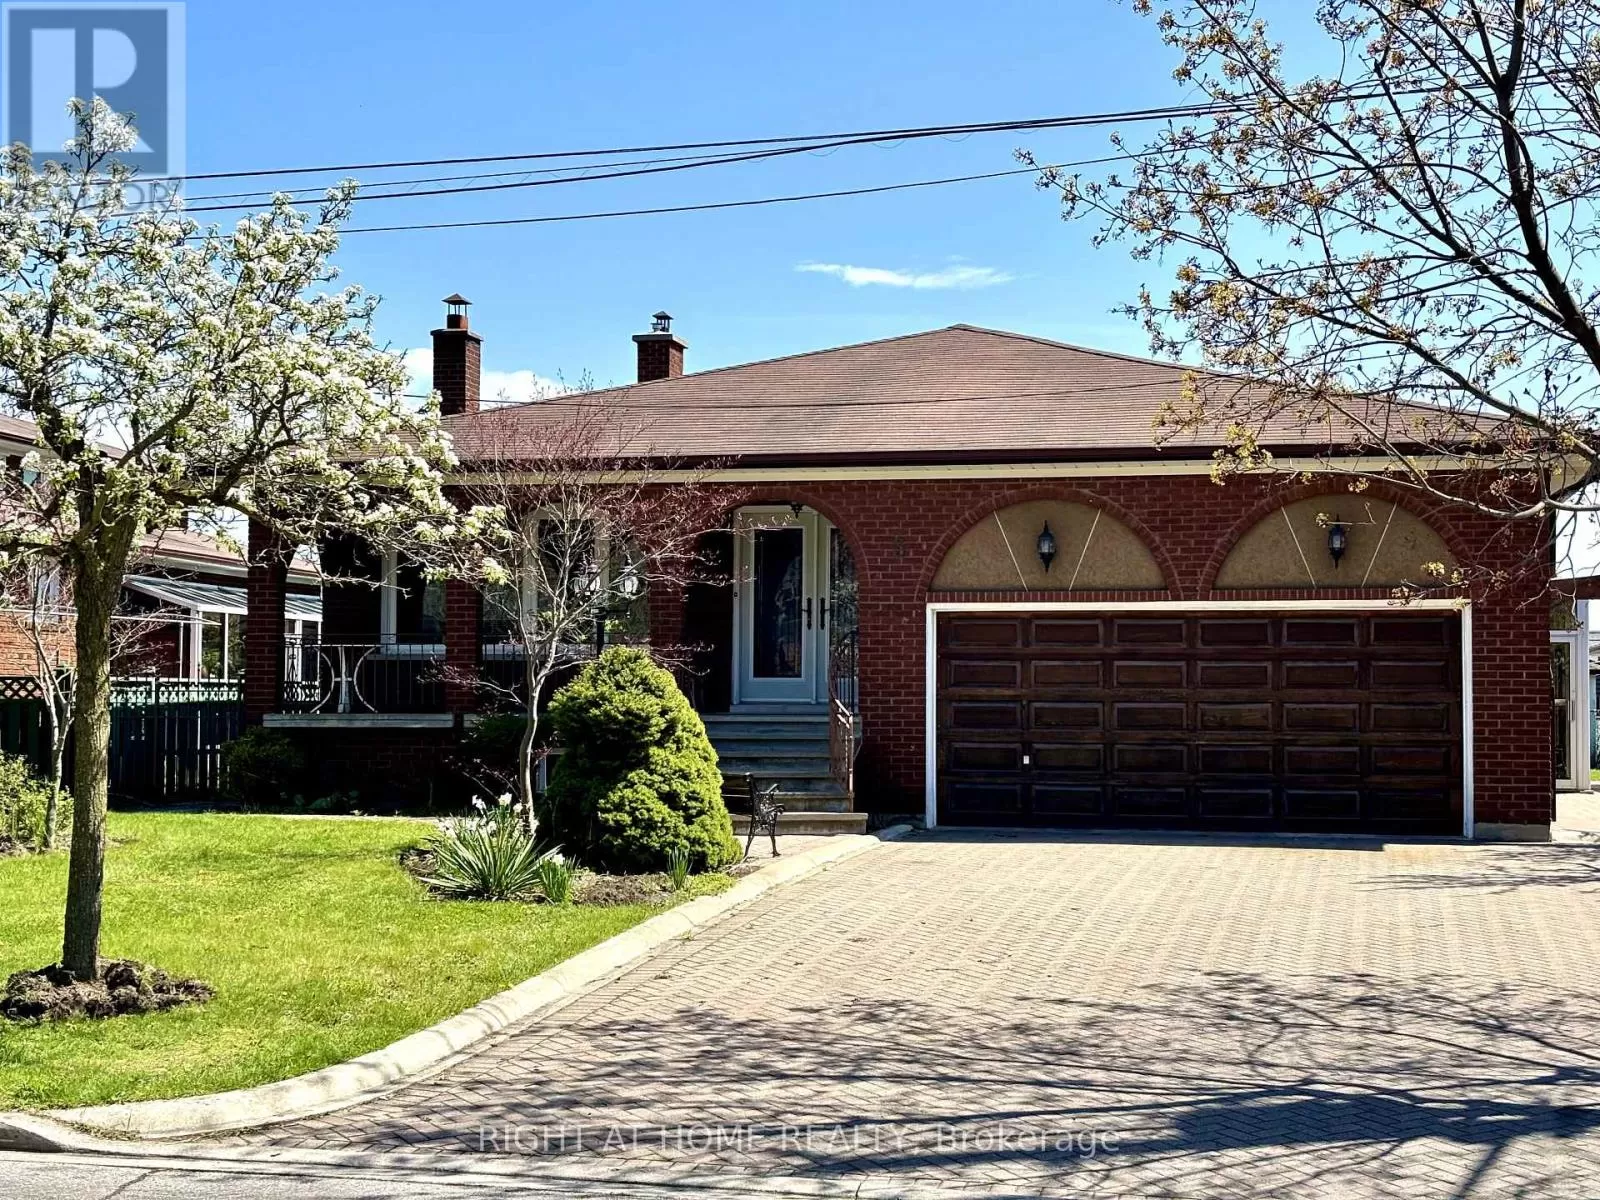 House for rent: 3 Tothill Road, Toronto, Ontario M9L 1H8